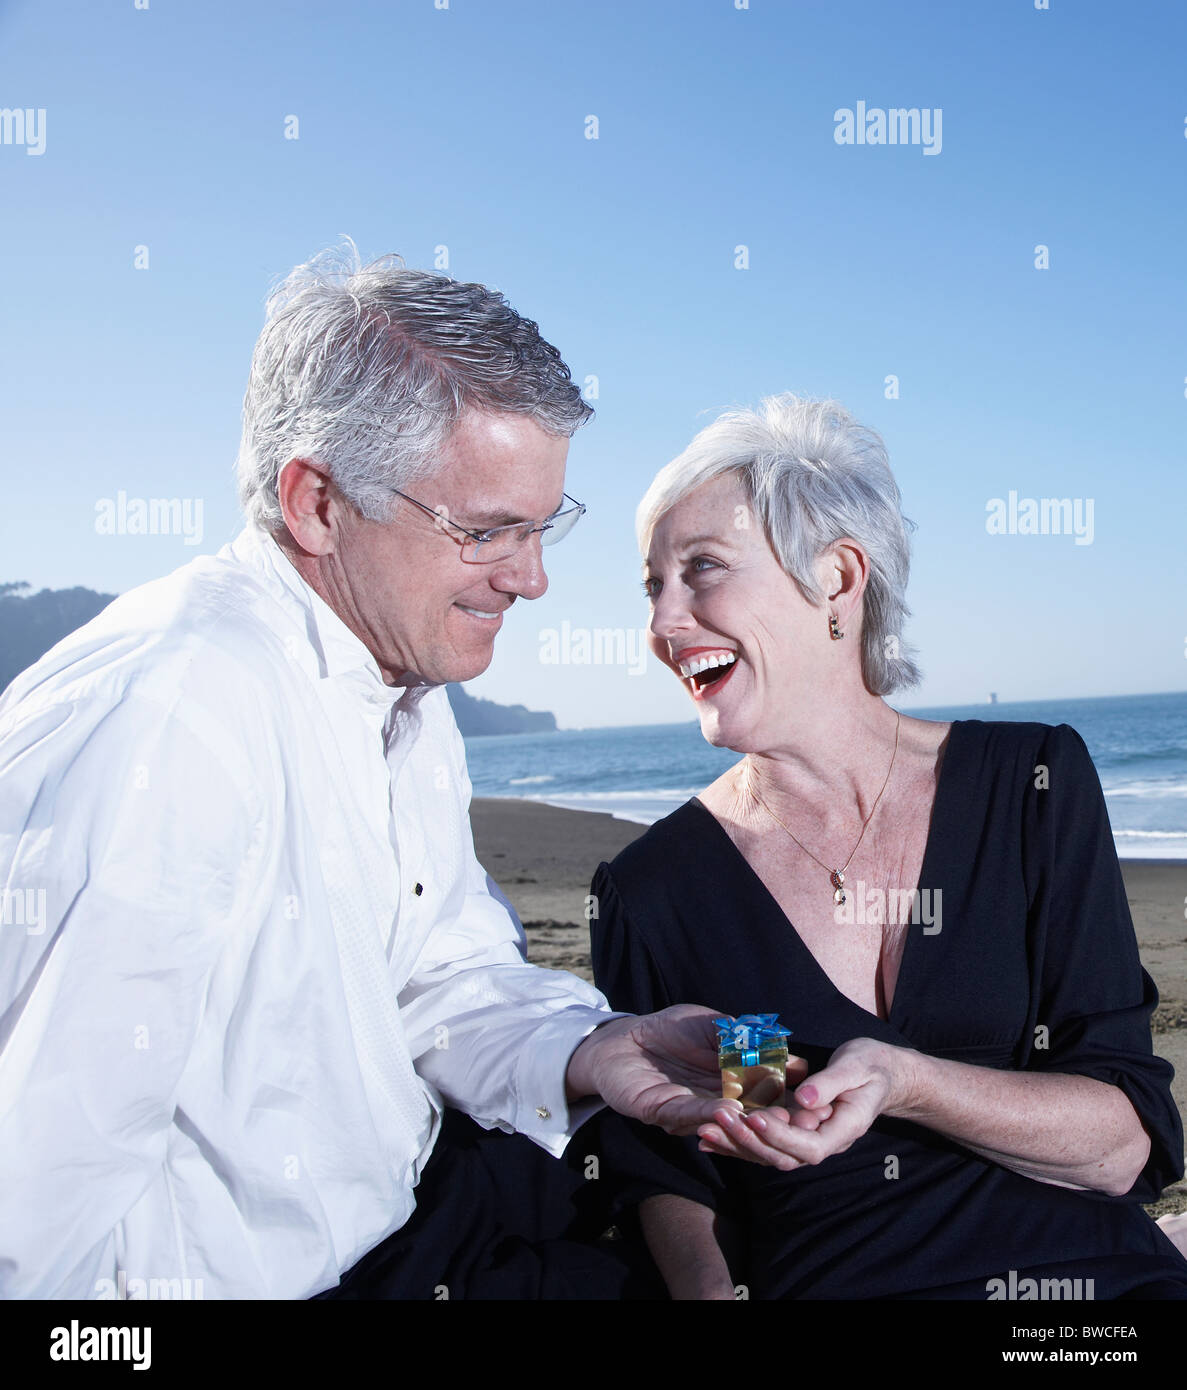 USA, California, Fairfax, Happy mature mag giving small gift to woman on beach Stock Photo